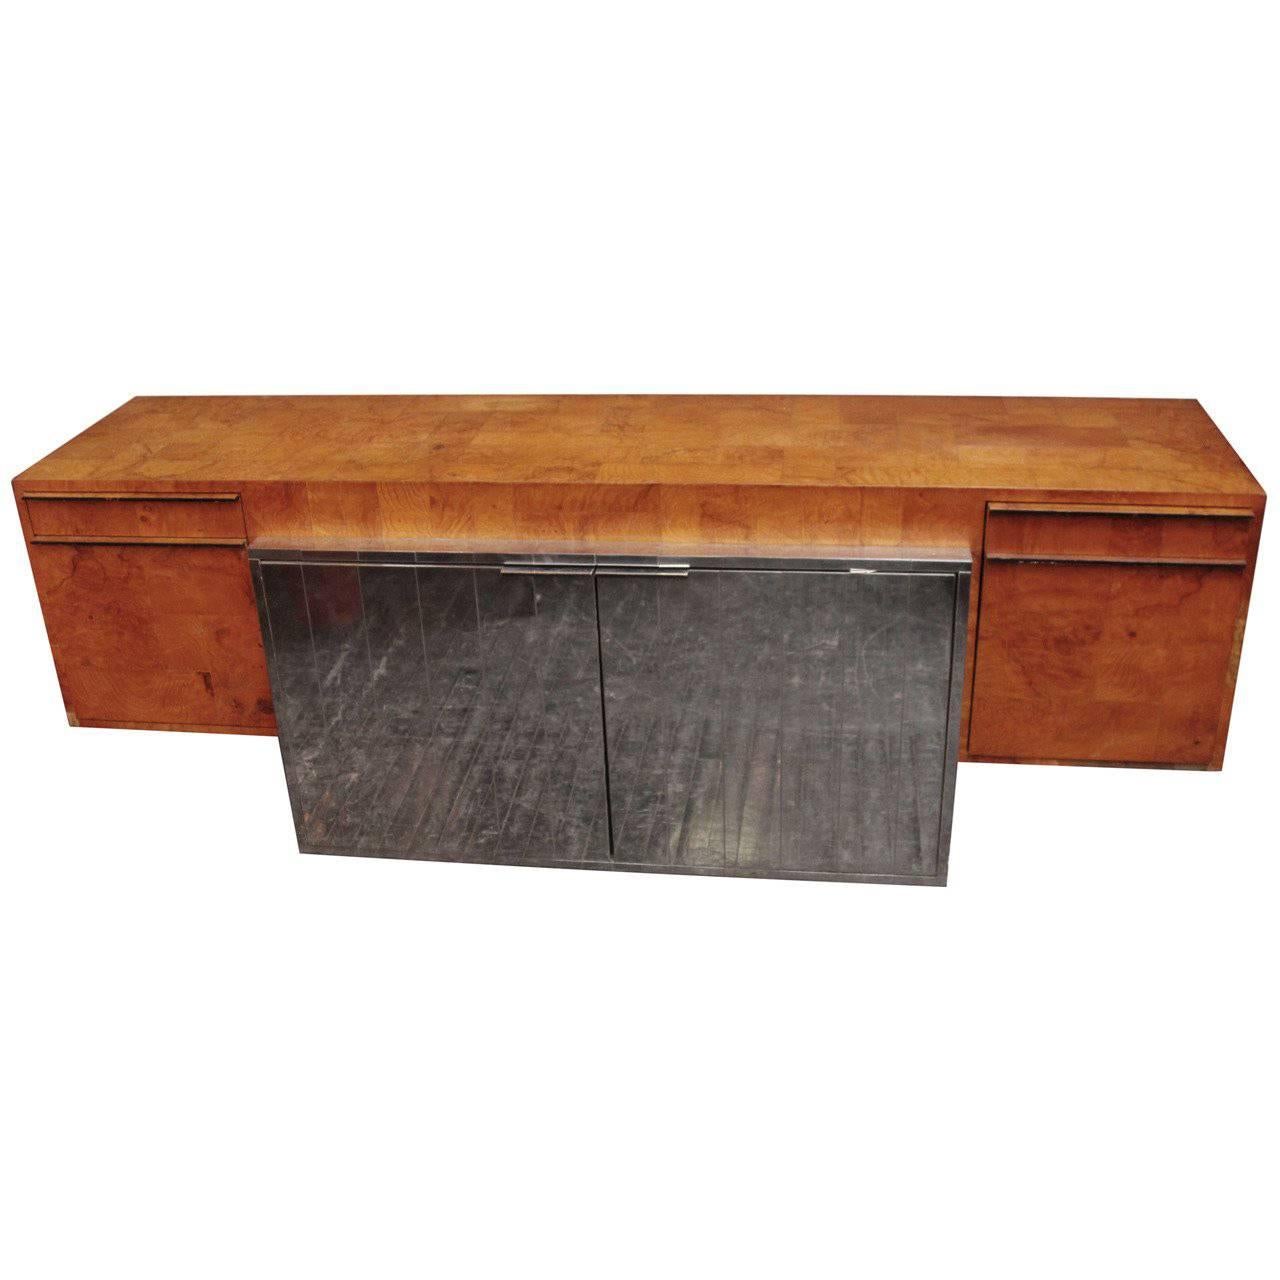 1974 Paul Evans Cantilevered Burled Walnut and Chrome "Cityscapes" Credenza